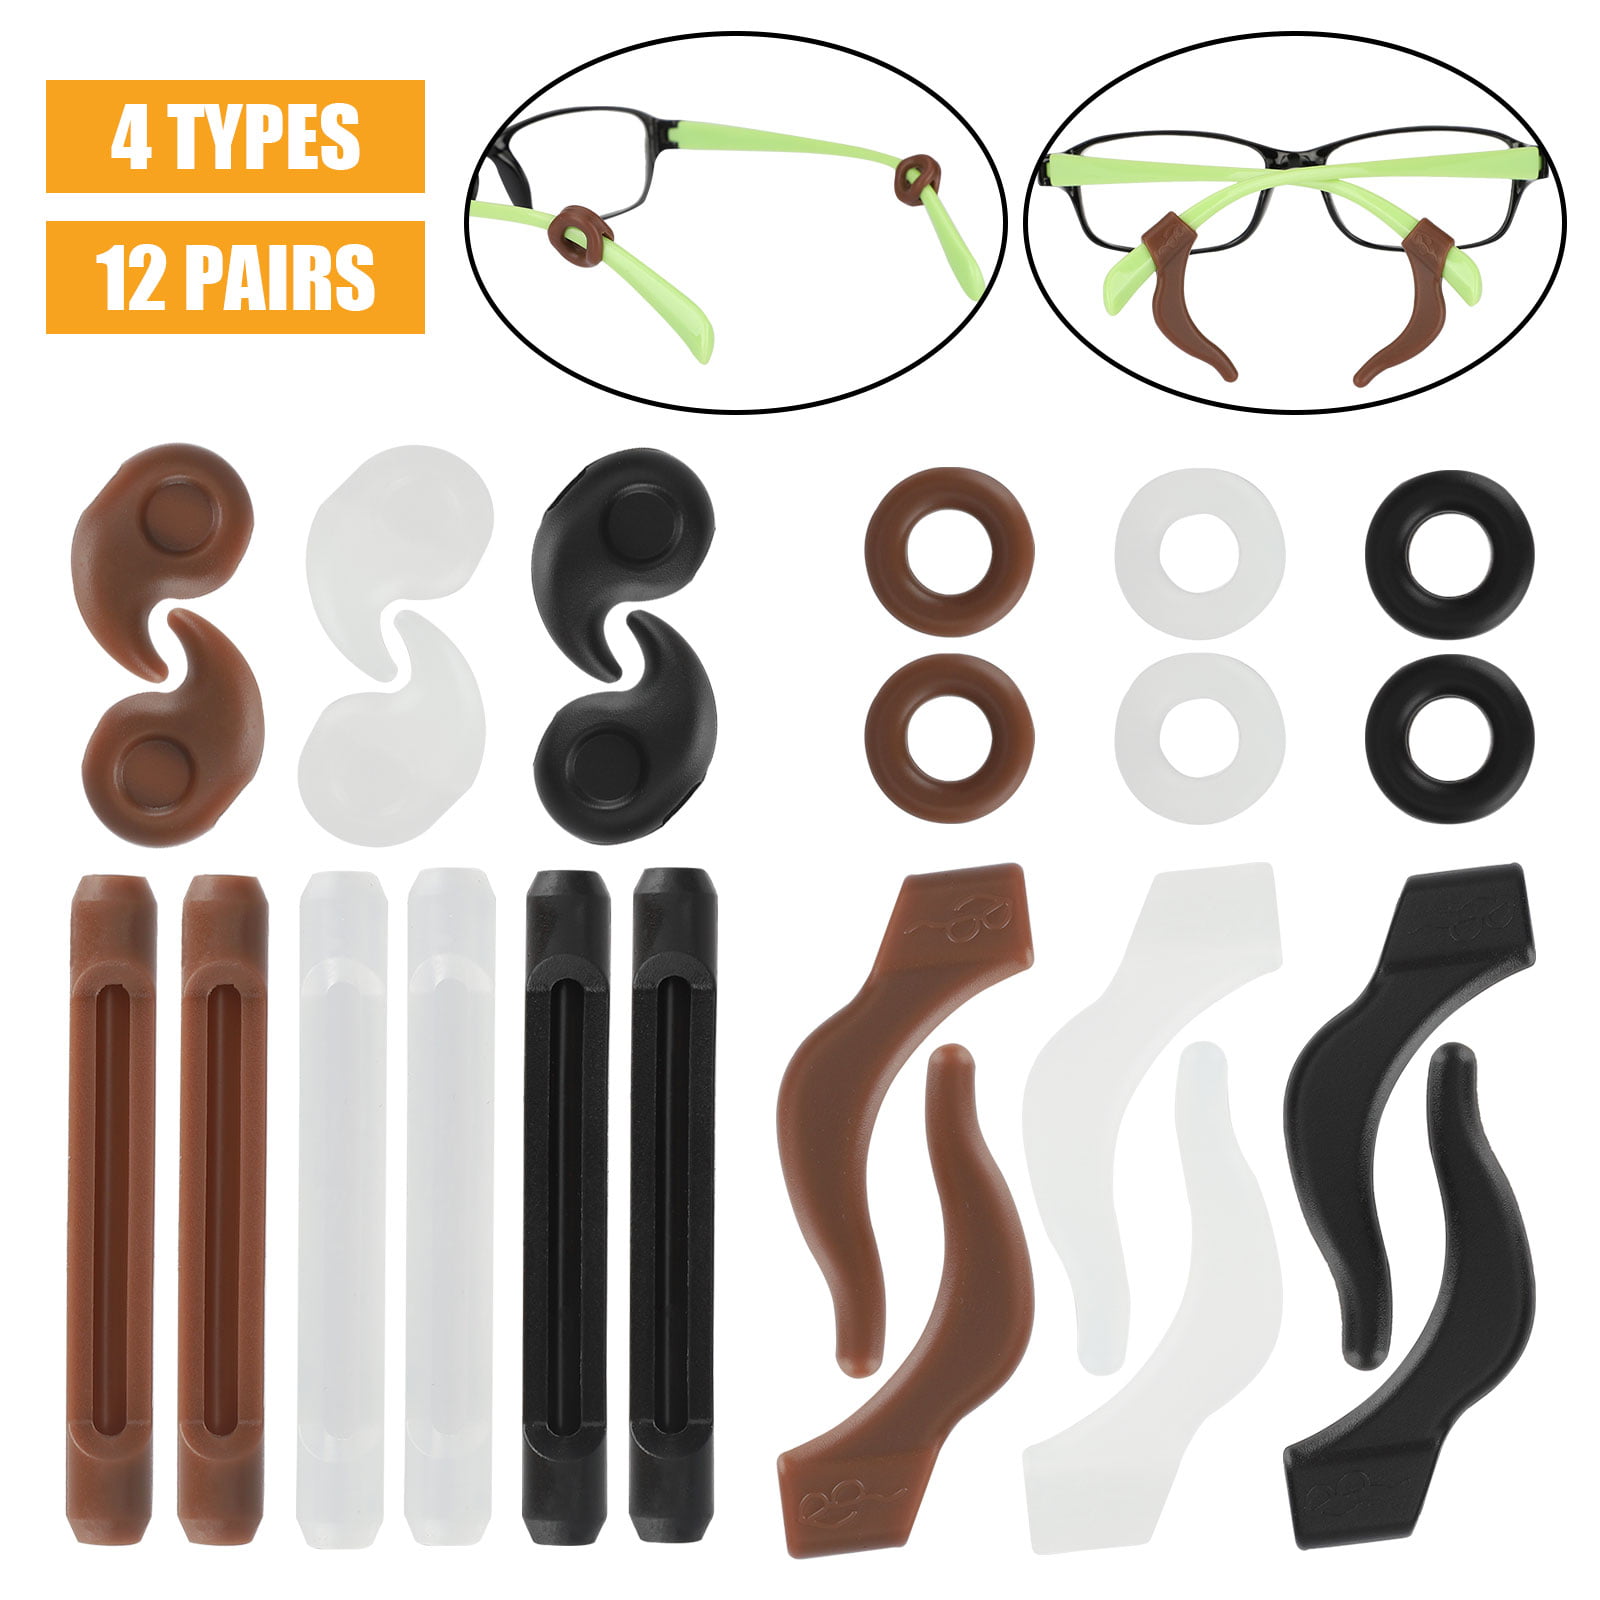 34PCS Eyeglasses Retainers Silicone Glasses Temple Holders Anti-Slip Protectors Comfort Eyewear Spectacle Stay Put Glasses Stoppers Ear Grip Hooks… Eyeglasses Retainers-34PCS